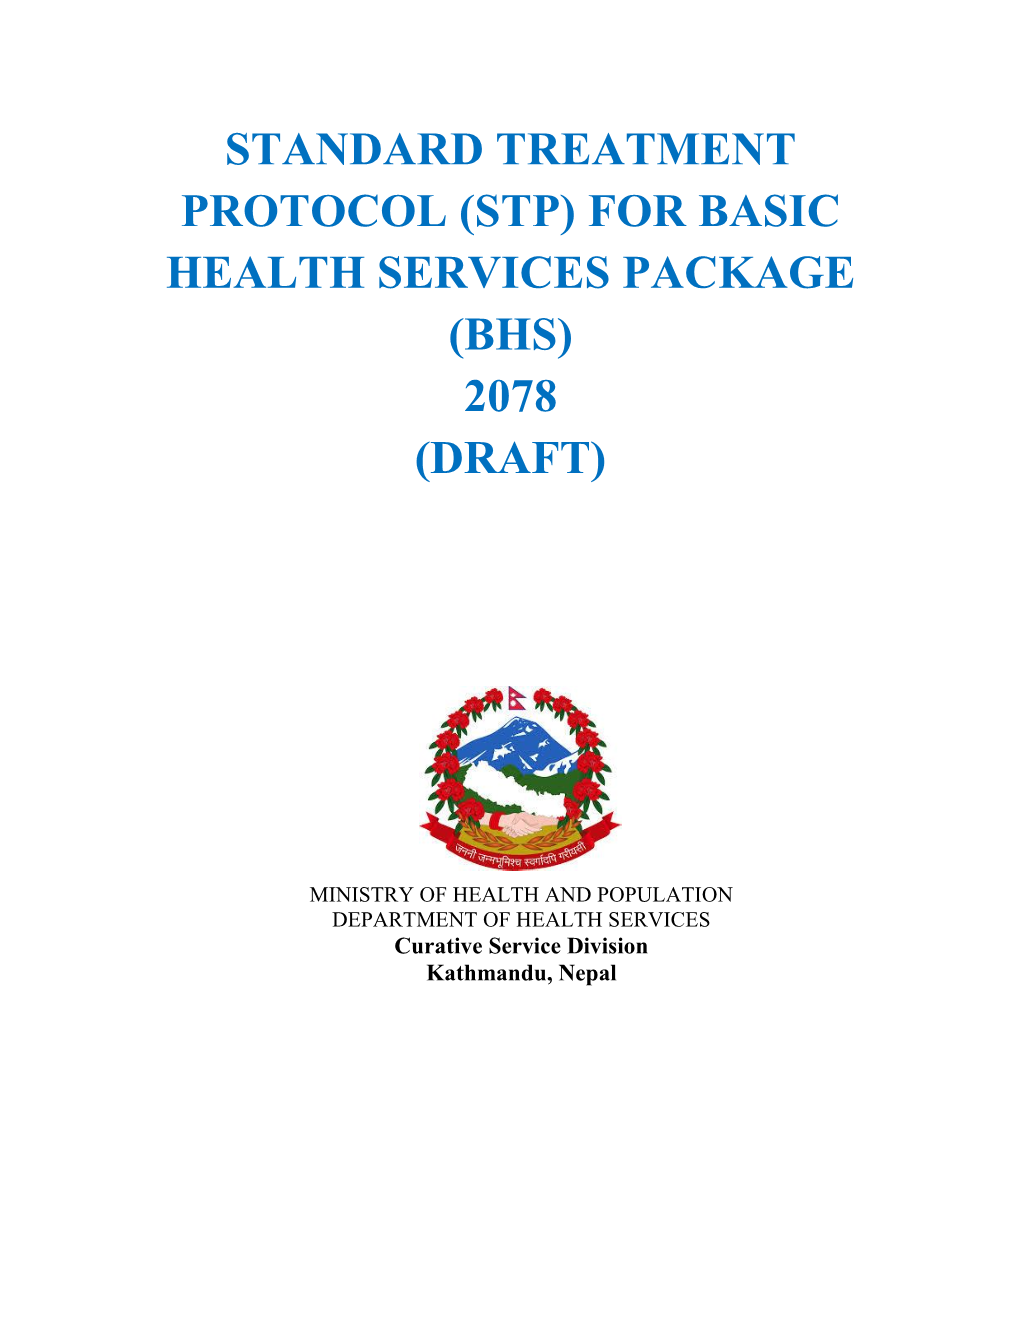 Standard Treatment Protocol (Stp) for Basic Health Services Package (Bhs) 2078 (Draft)